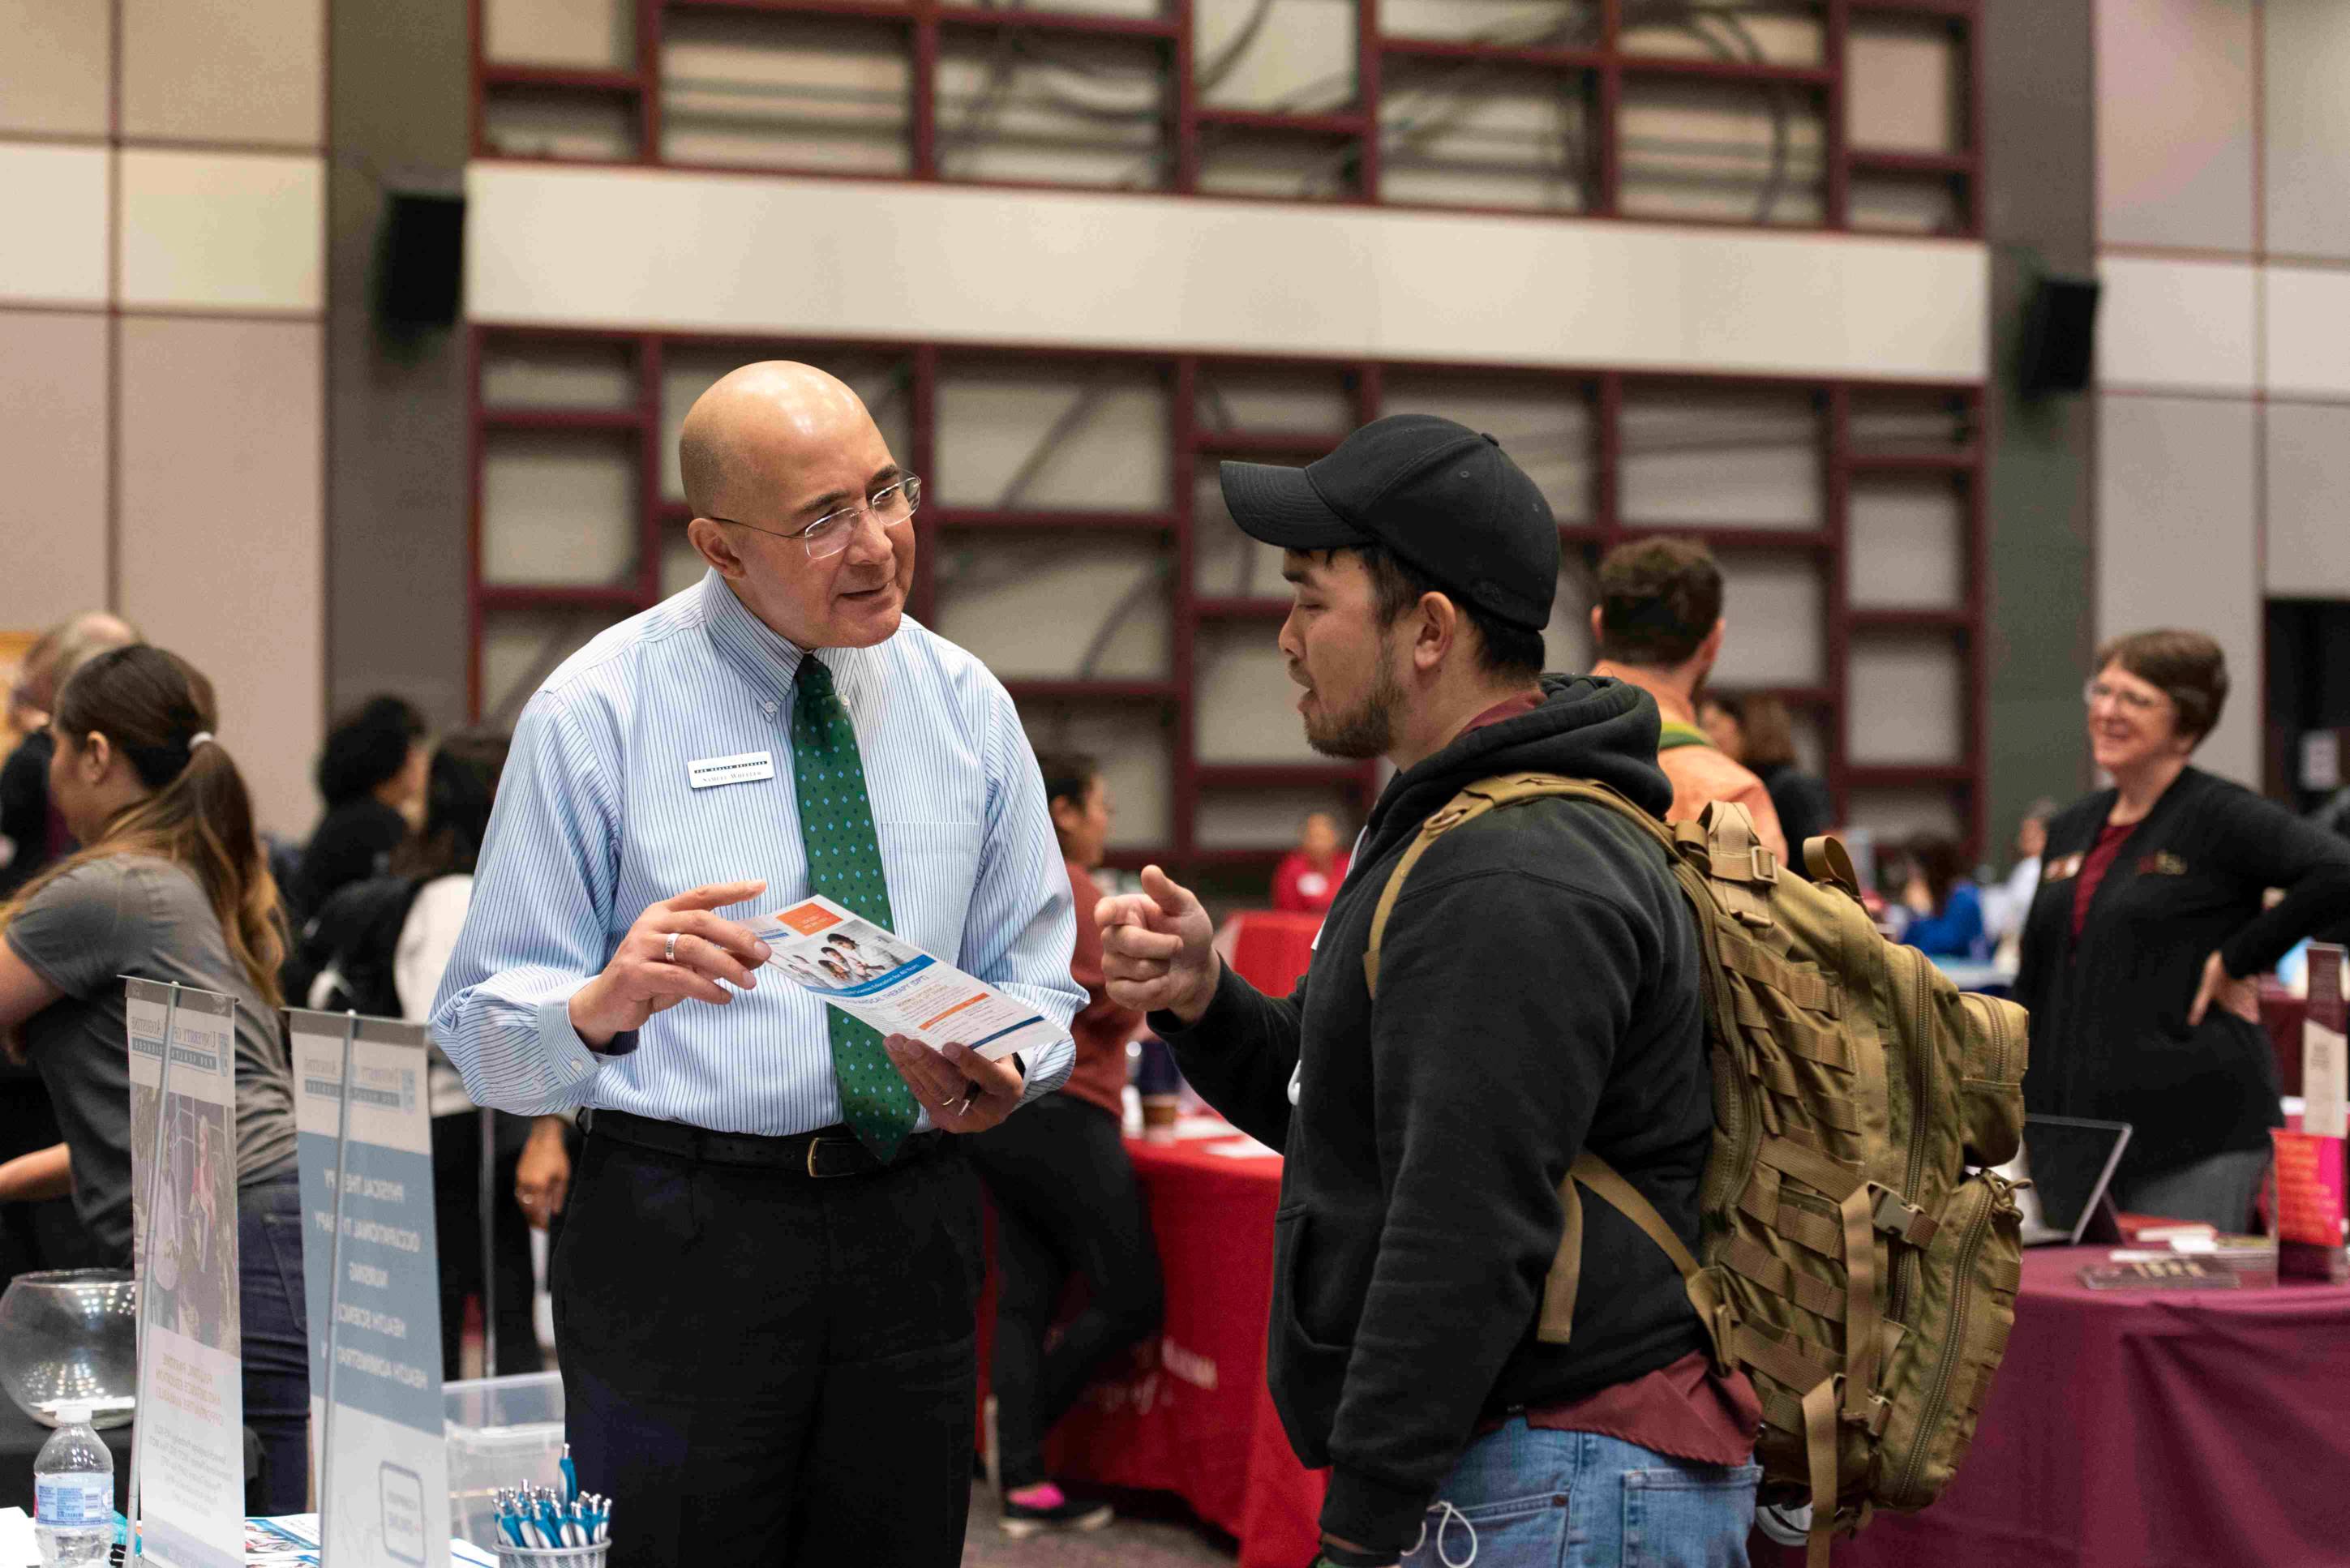 a professor and student share a conversation during a fair